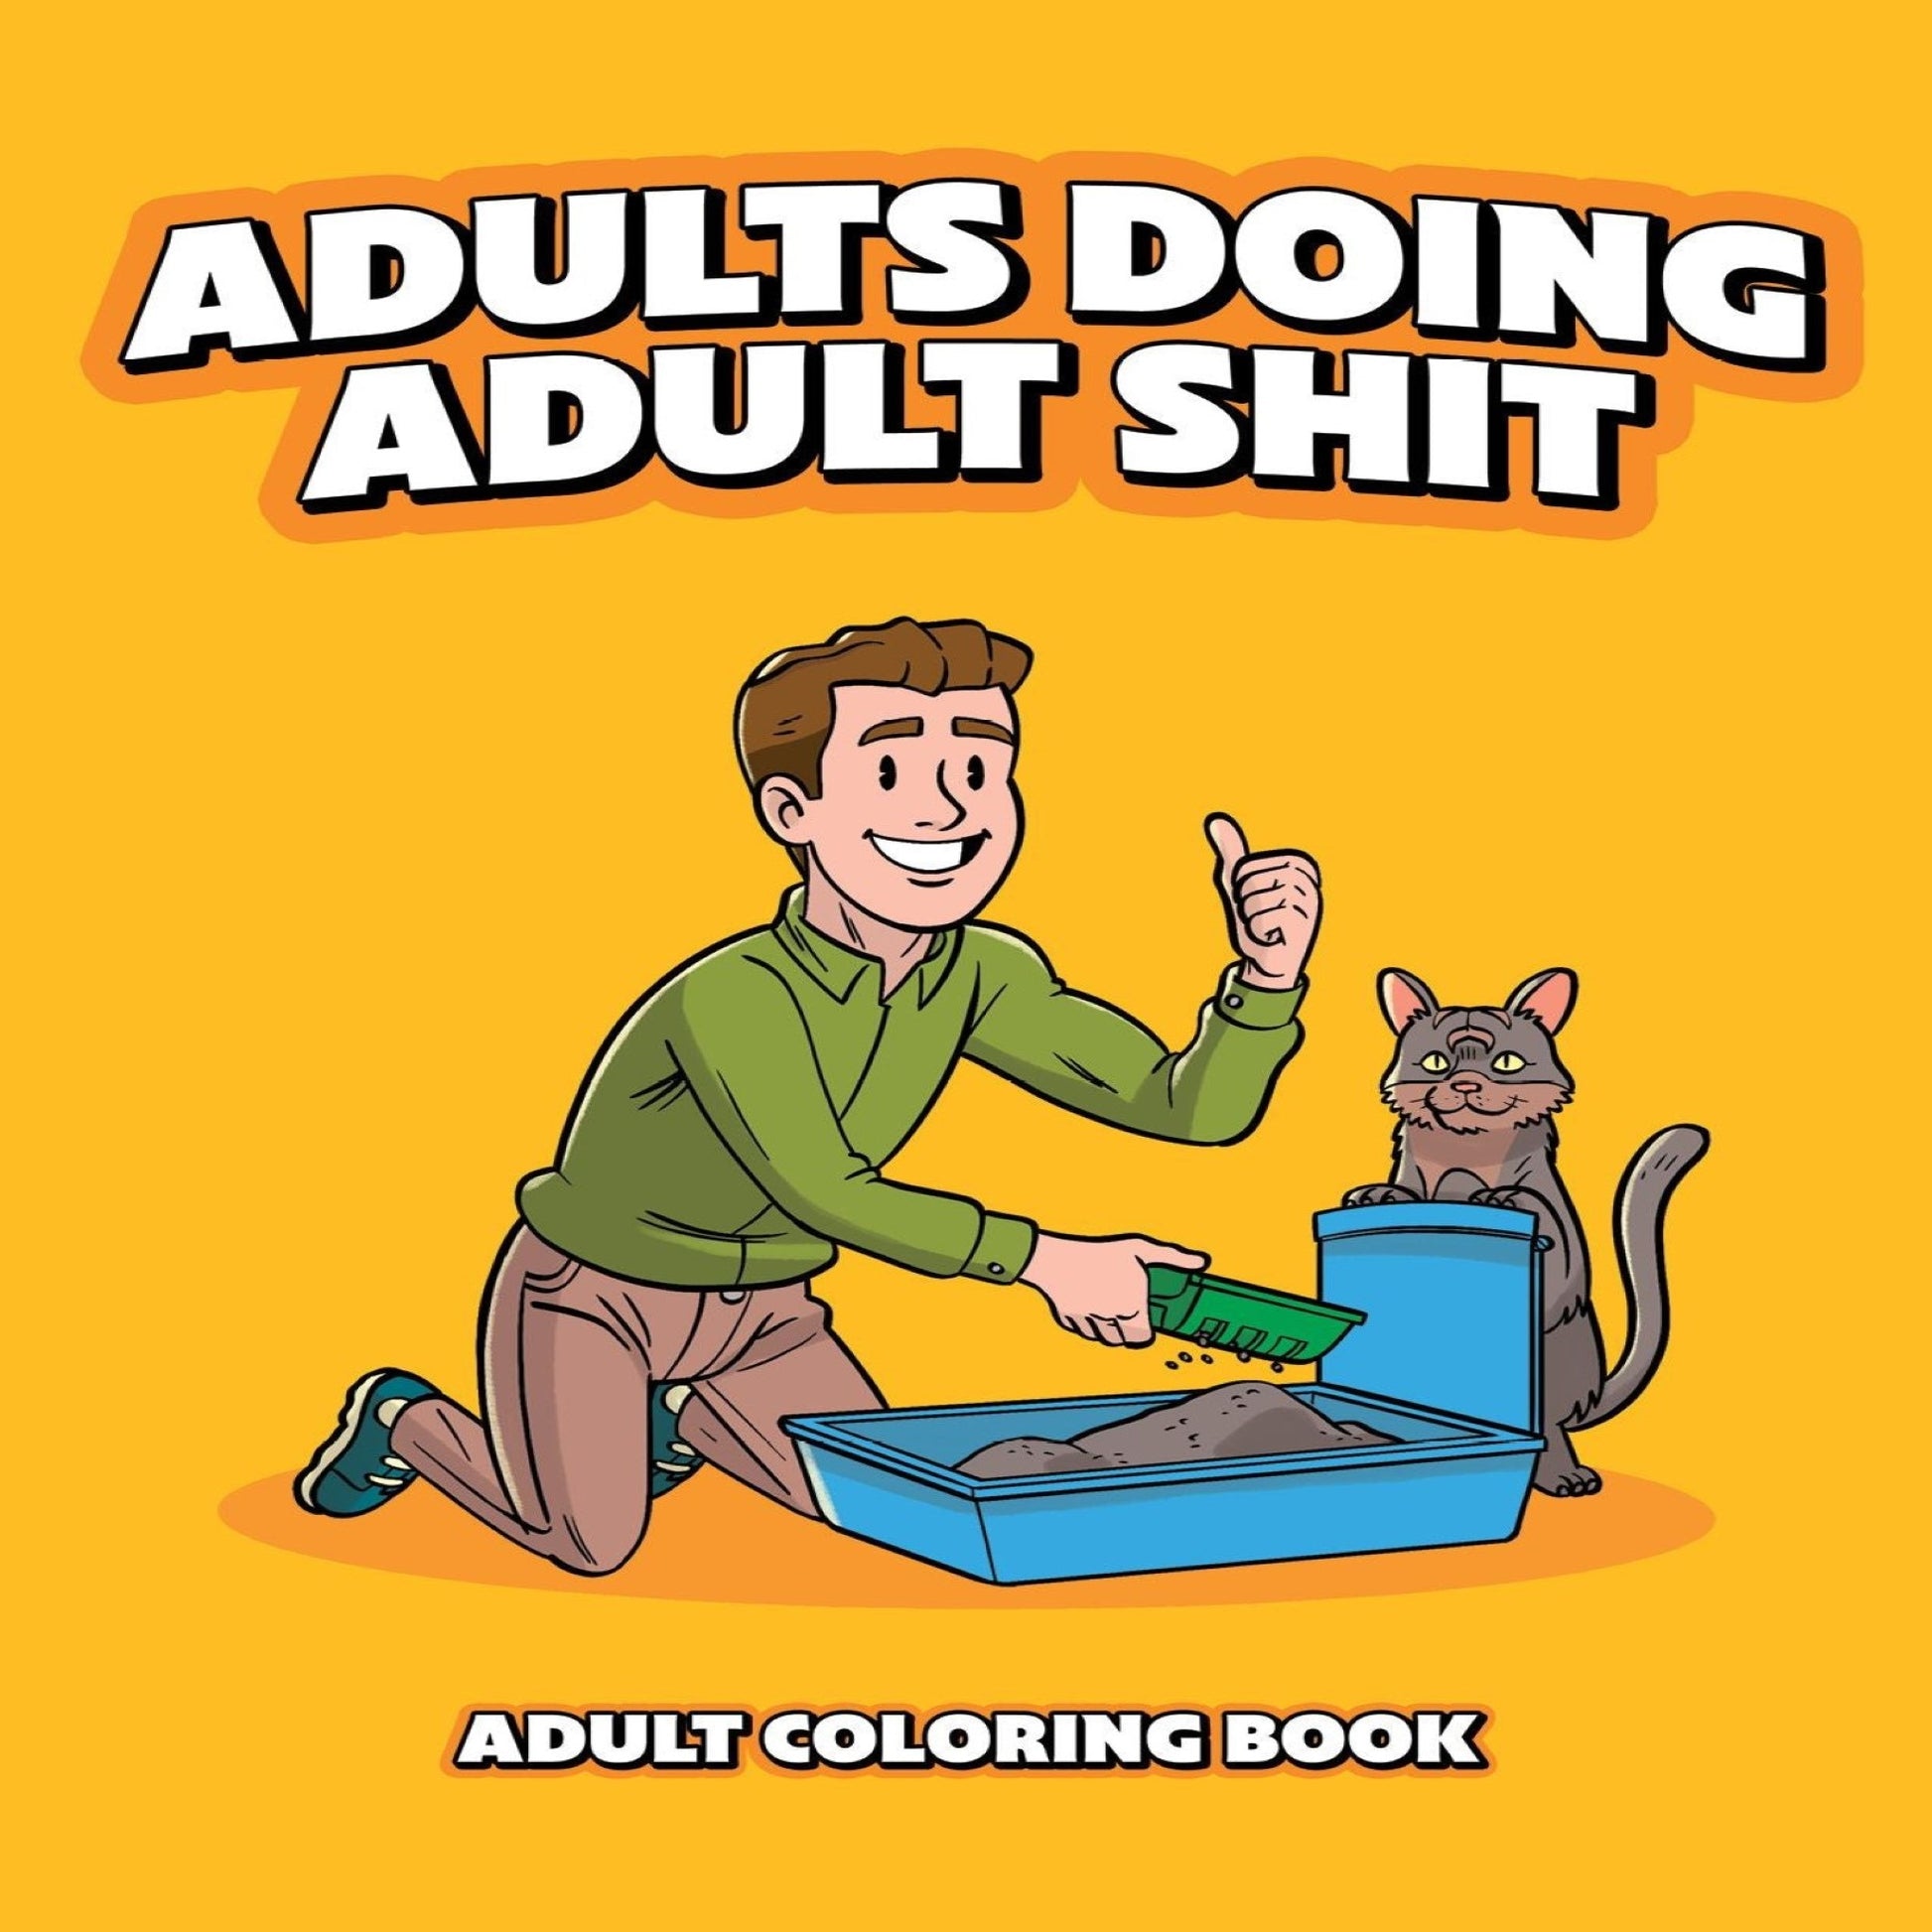 Adulting-coloring-book